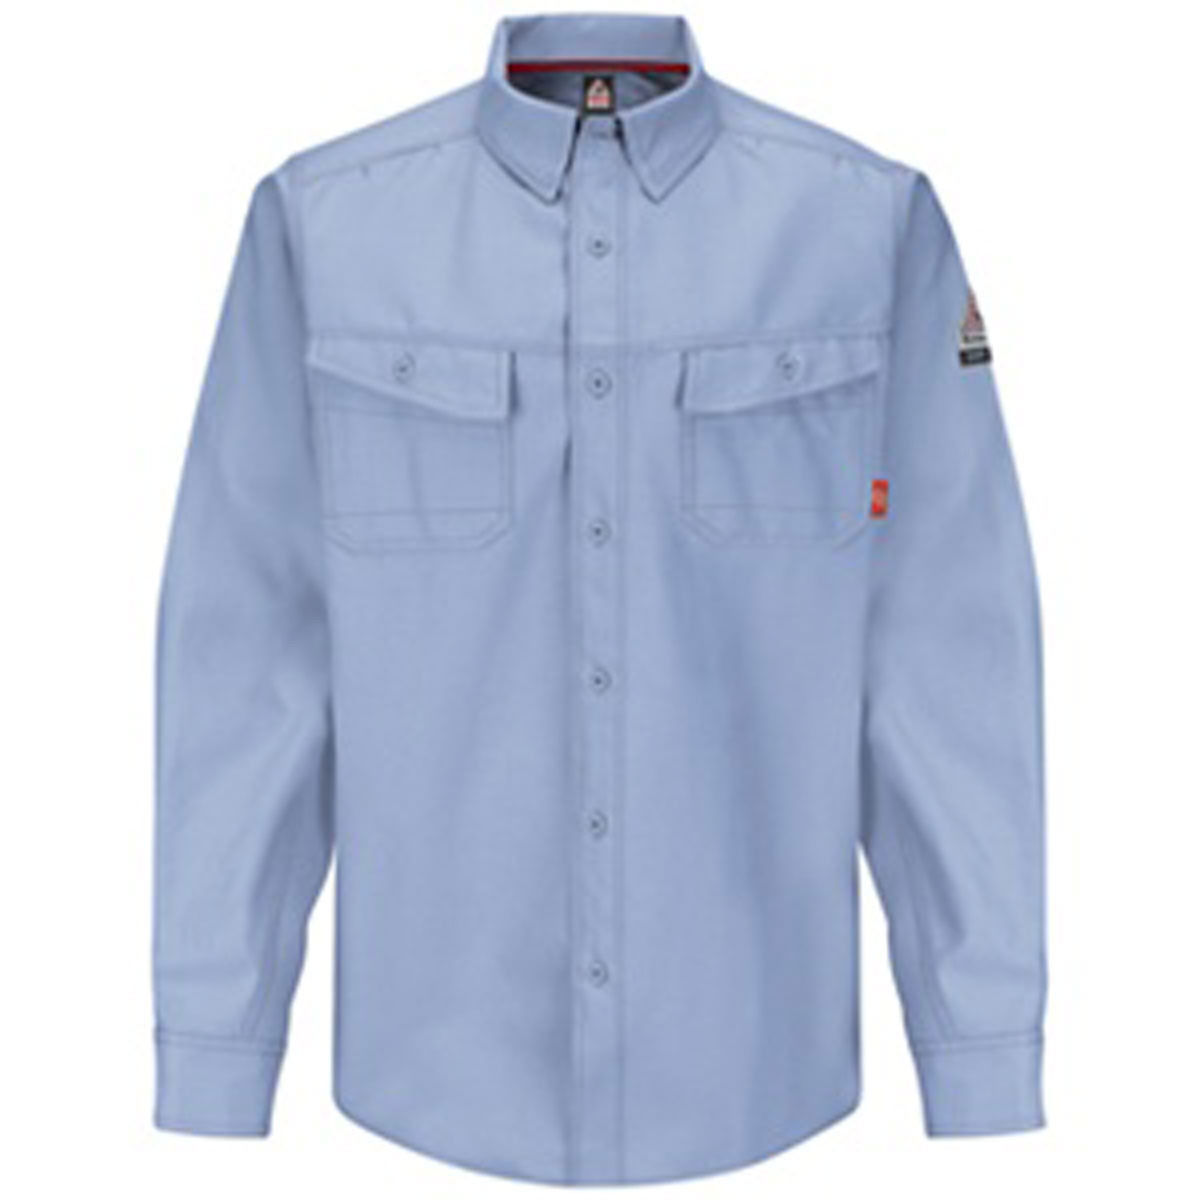 What fabric is used in Bulwark FR shirts, specifically the iQ Series QS40LB Men's Work Shirt?